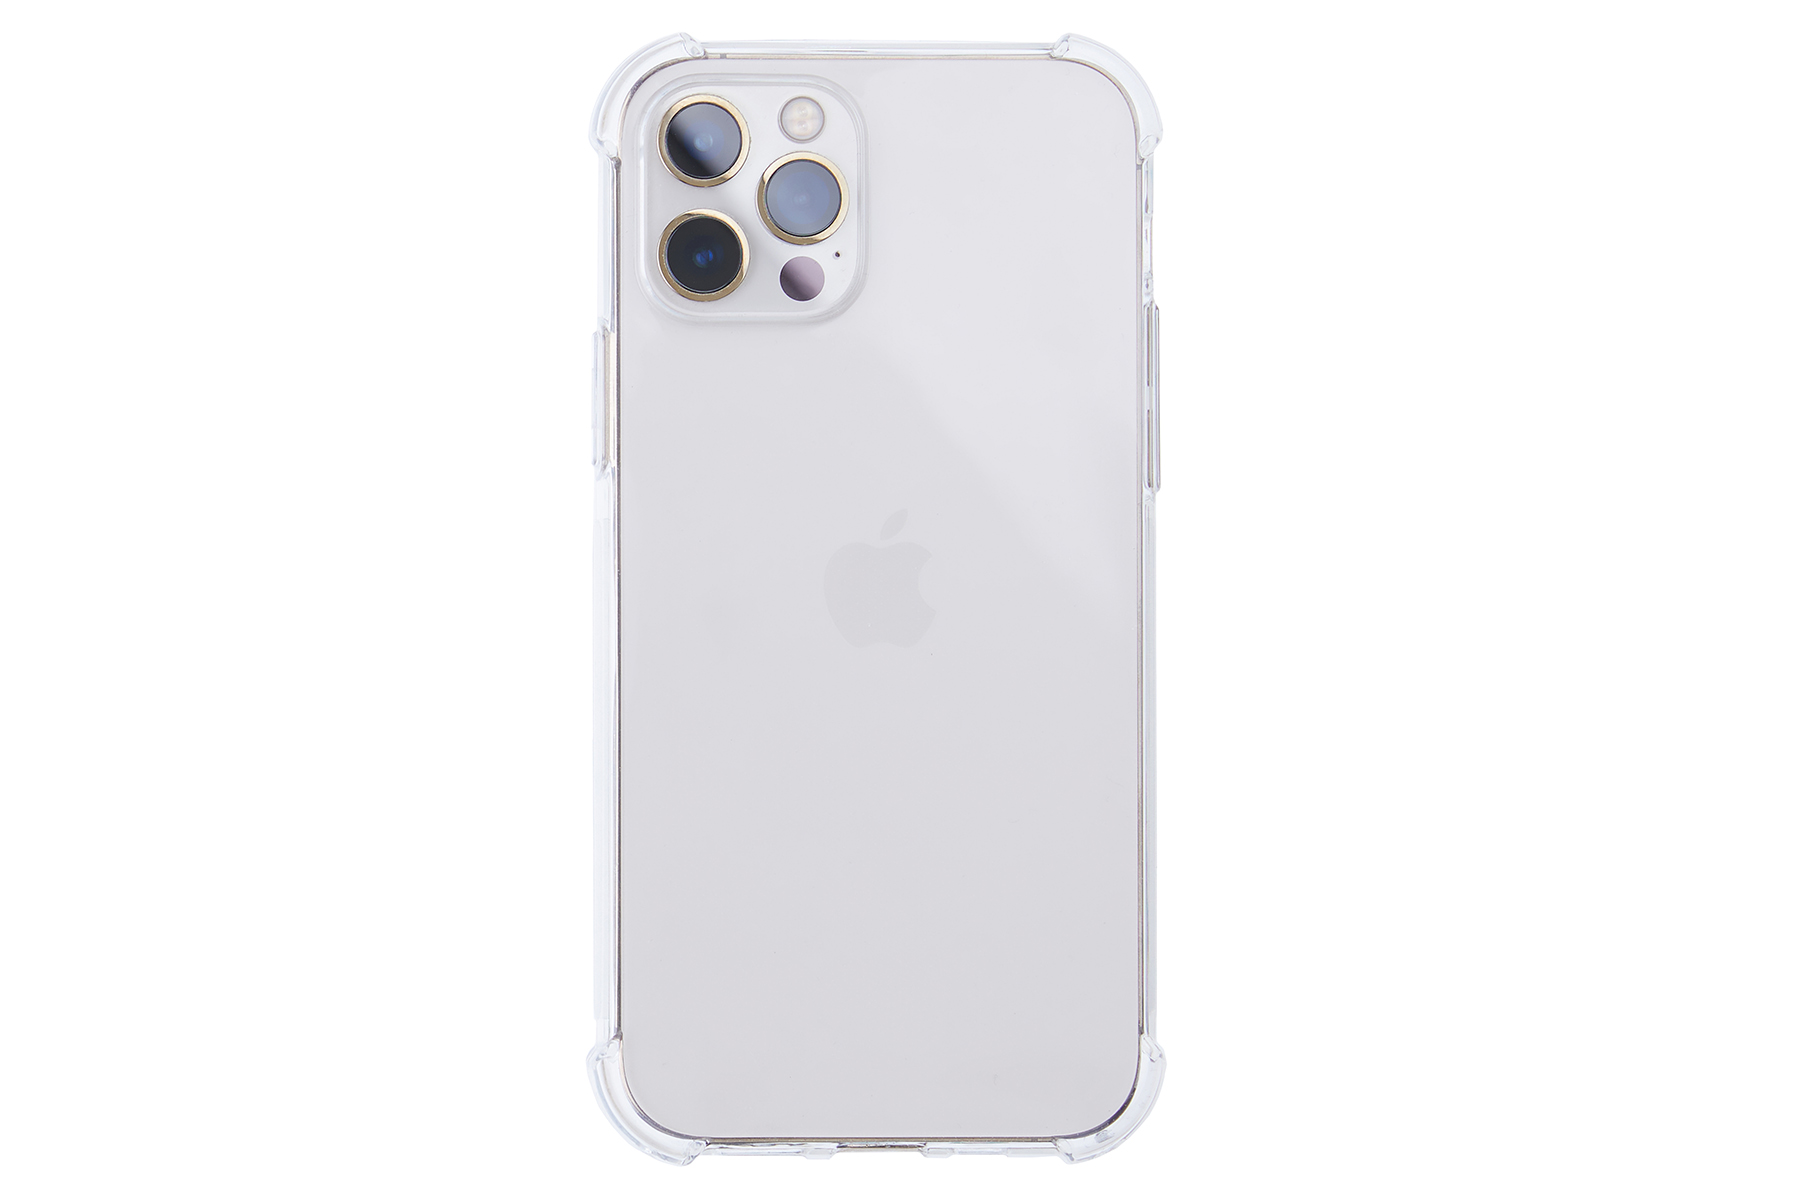 MTB MORE ENERGY Clear Armor Google, Pixel 4a, Case, Backcover, Transparent